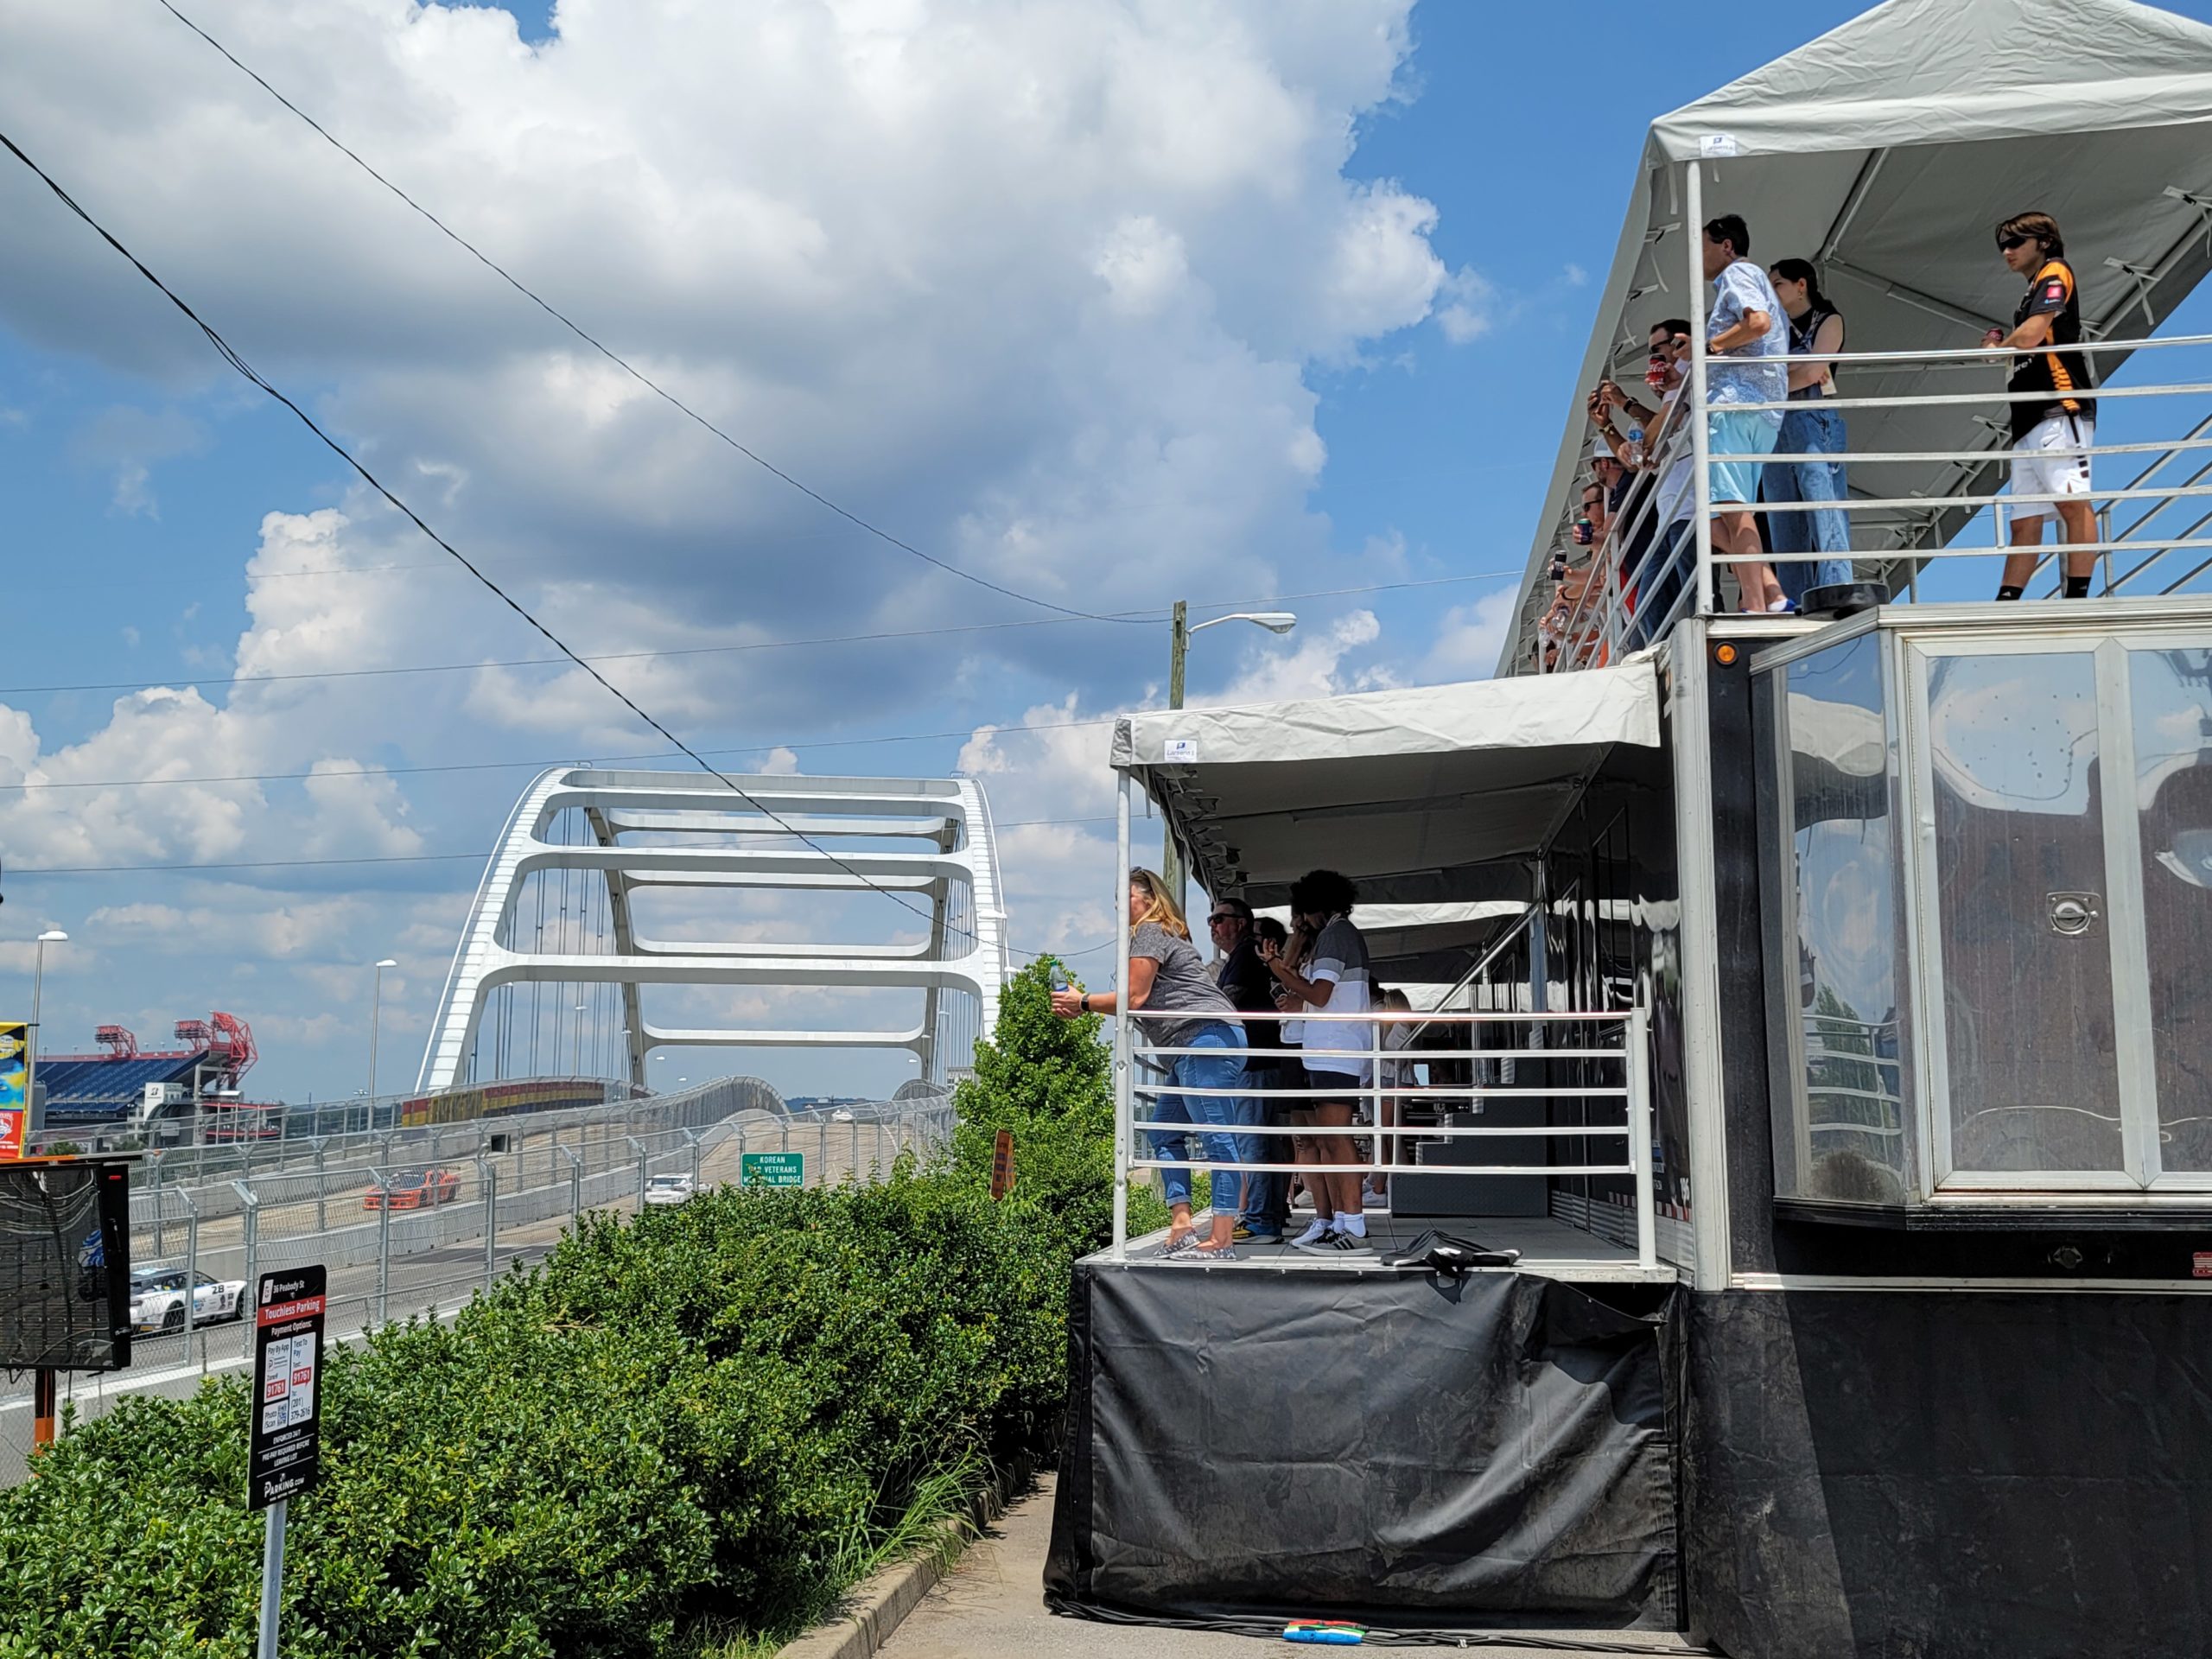 People on promobile double decks watching the tracks at Music City Grand Prix